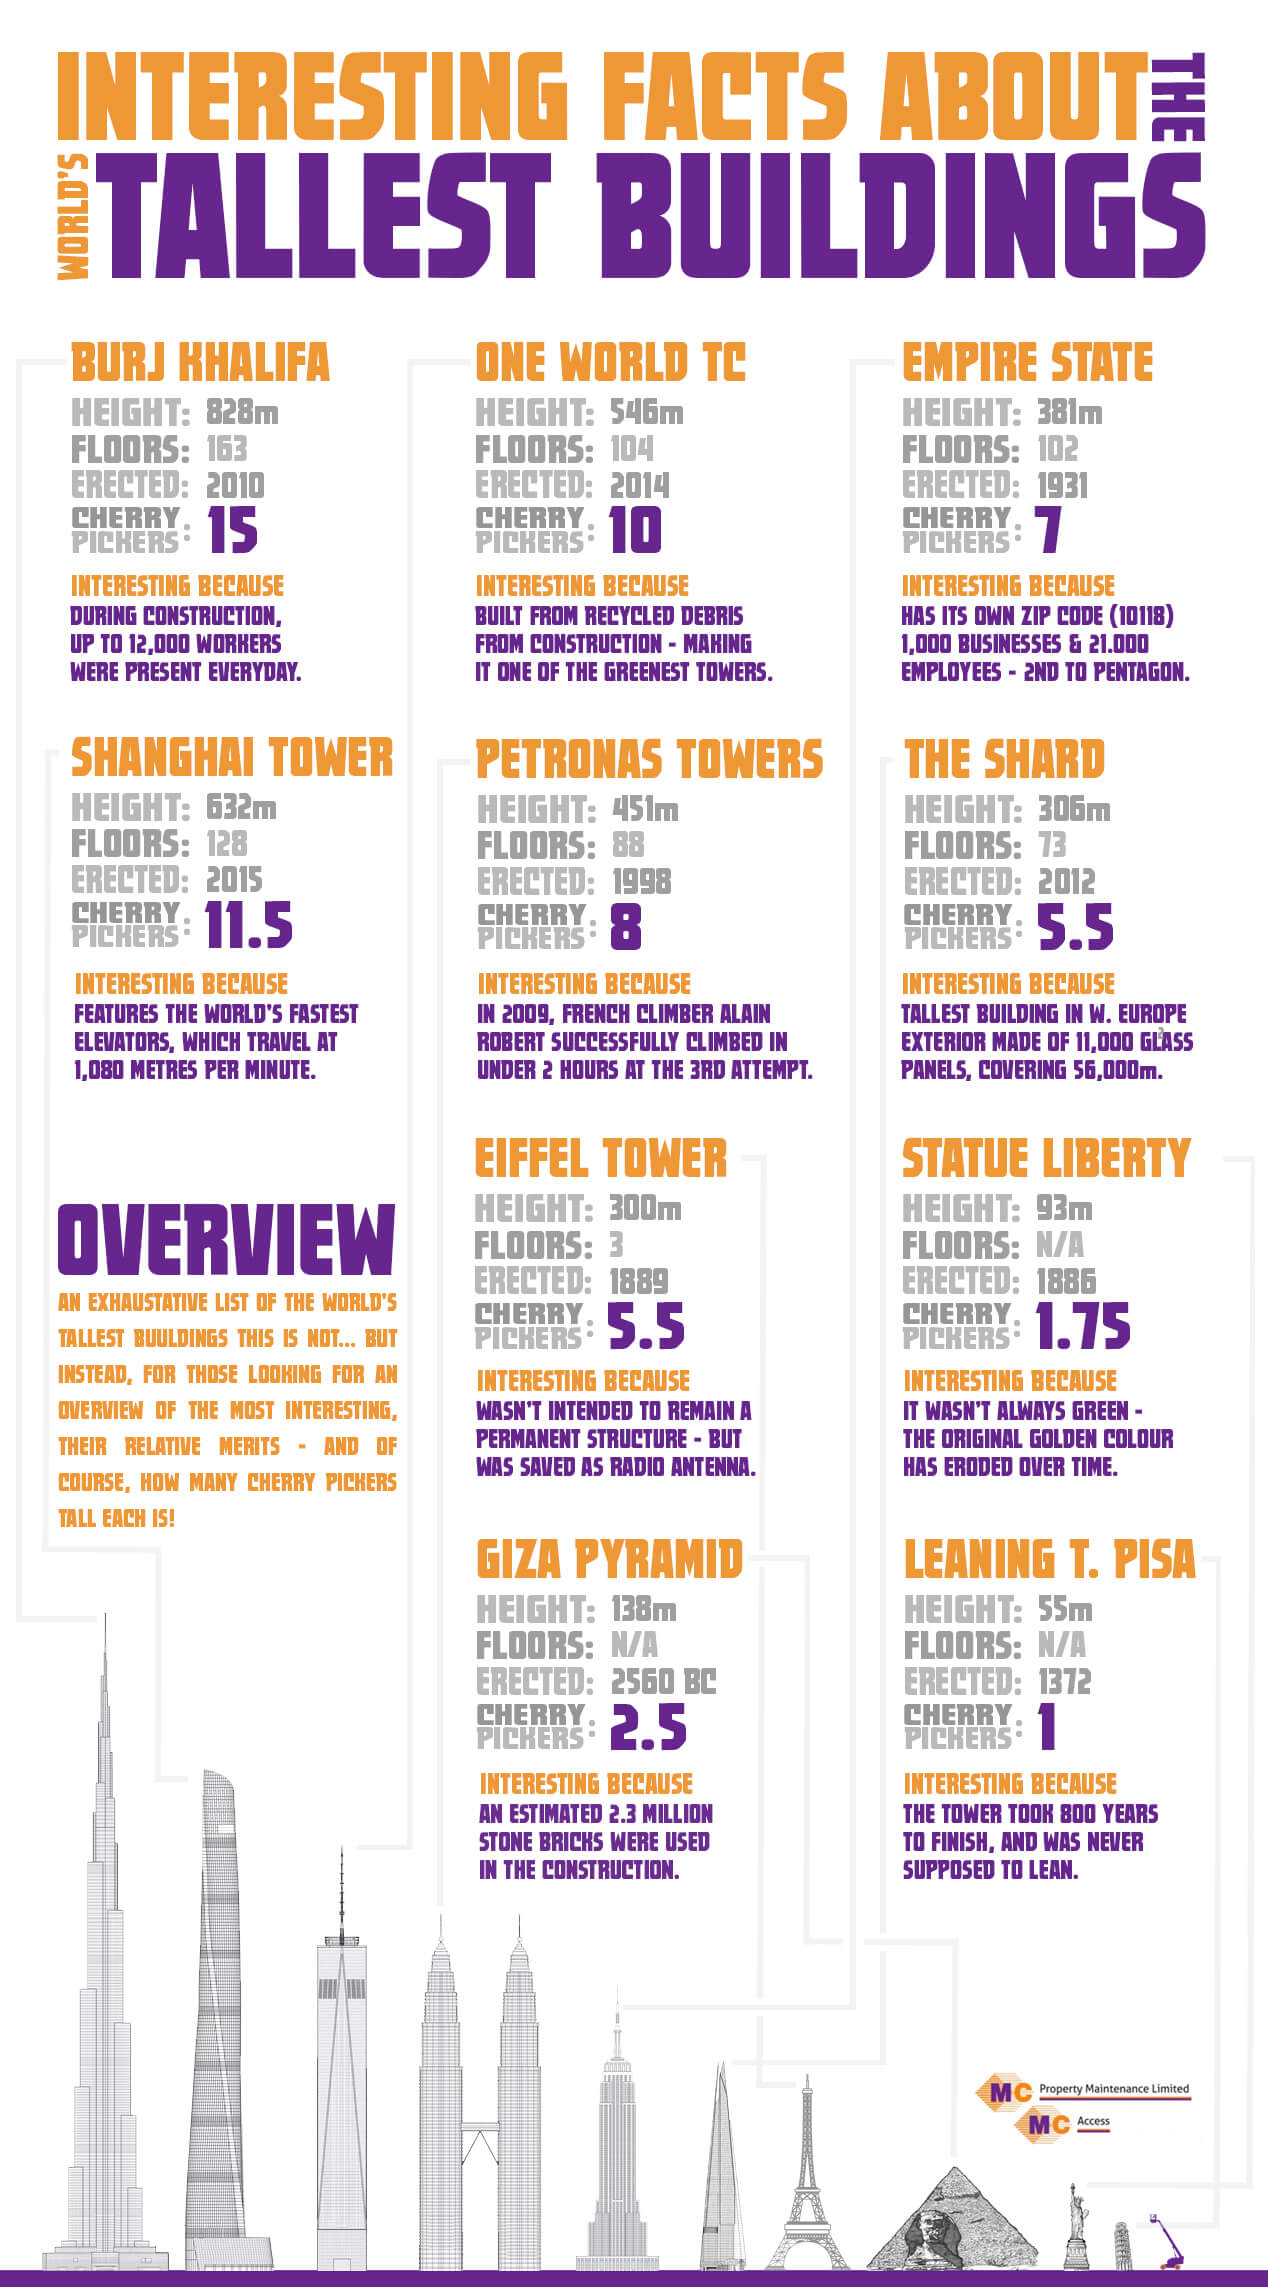 Interesting Facts About the World’s Tallest Buildings